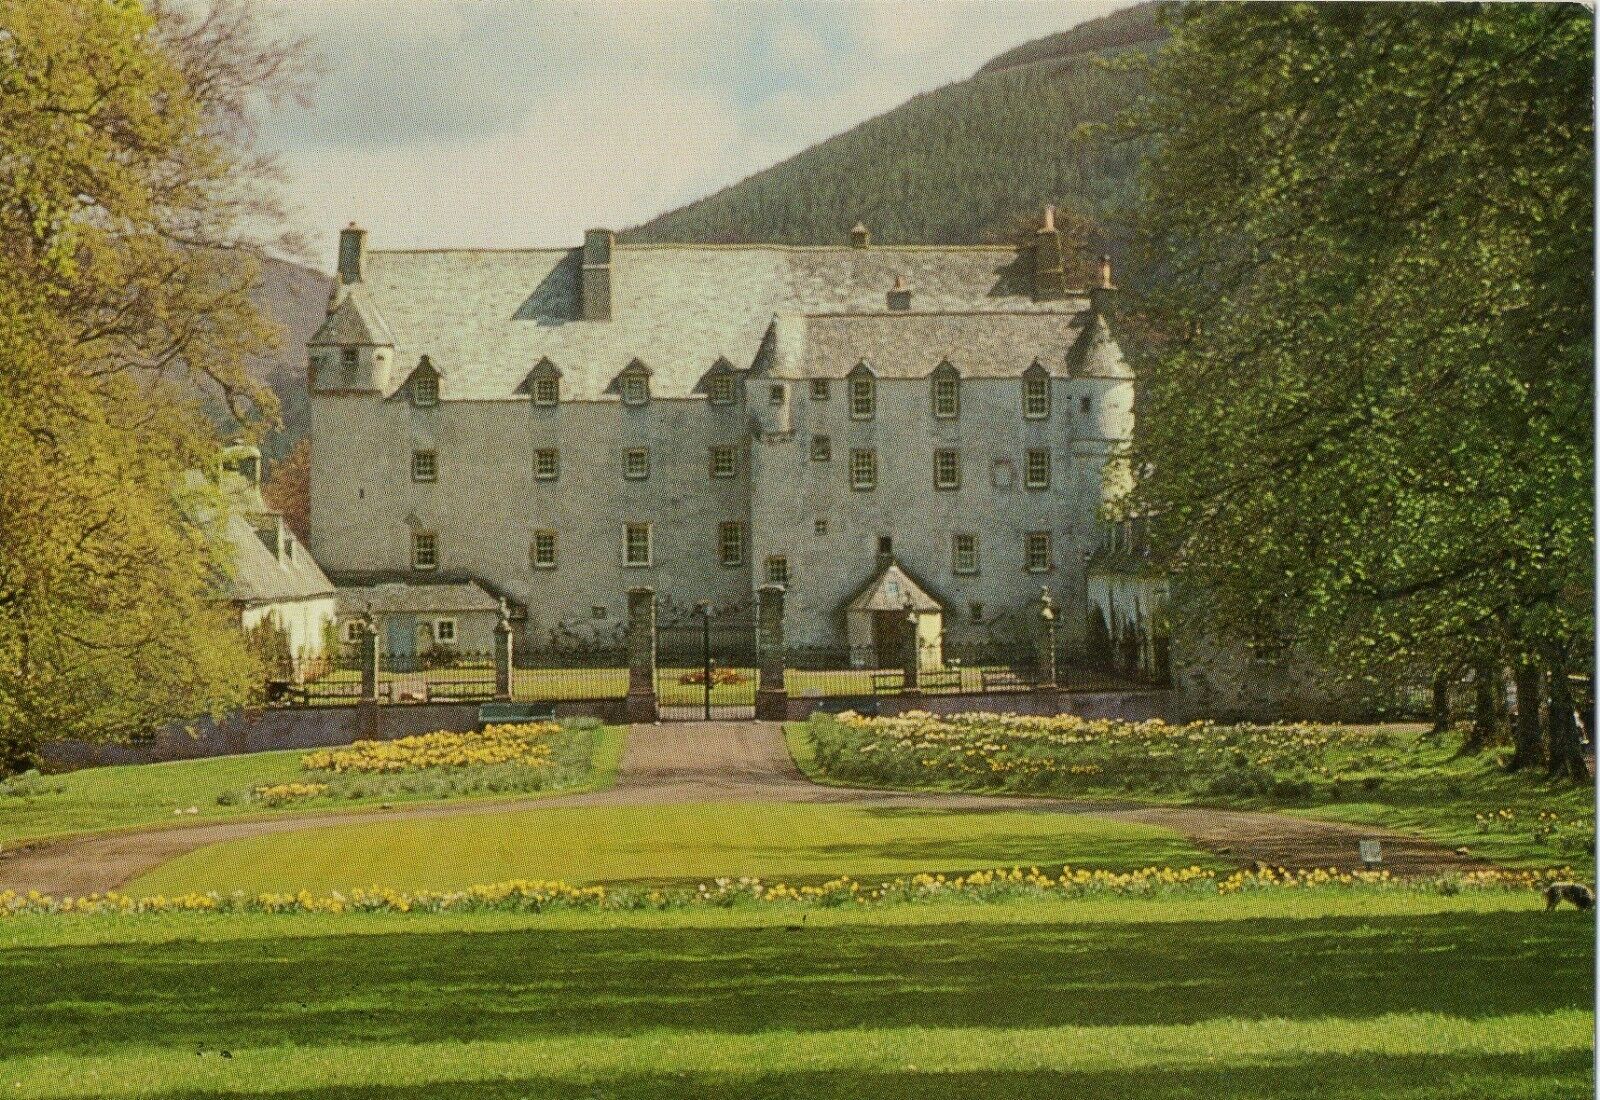 House Clearance - Service of TRAQUAIR HOUSE, INNERLEITHEN, Peeblesshire - In Very Good Condition